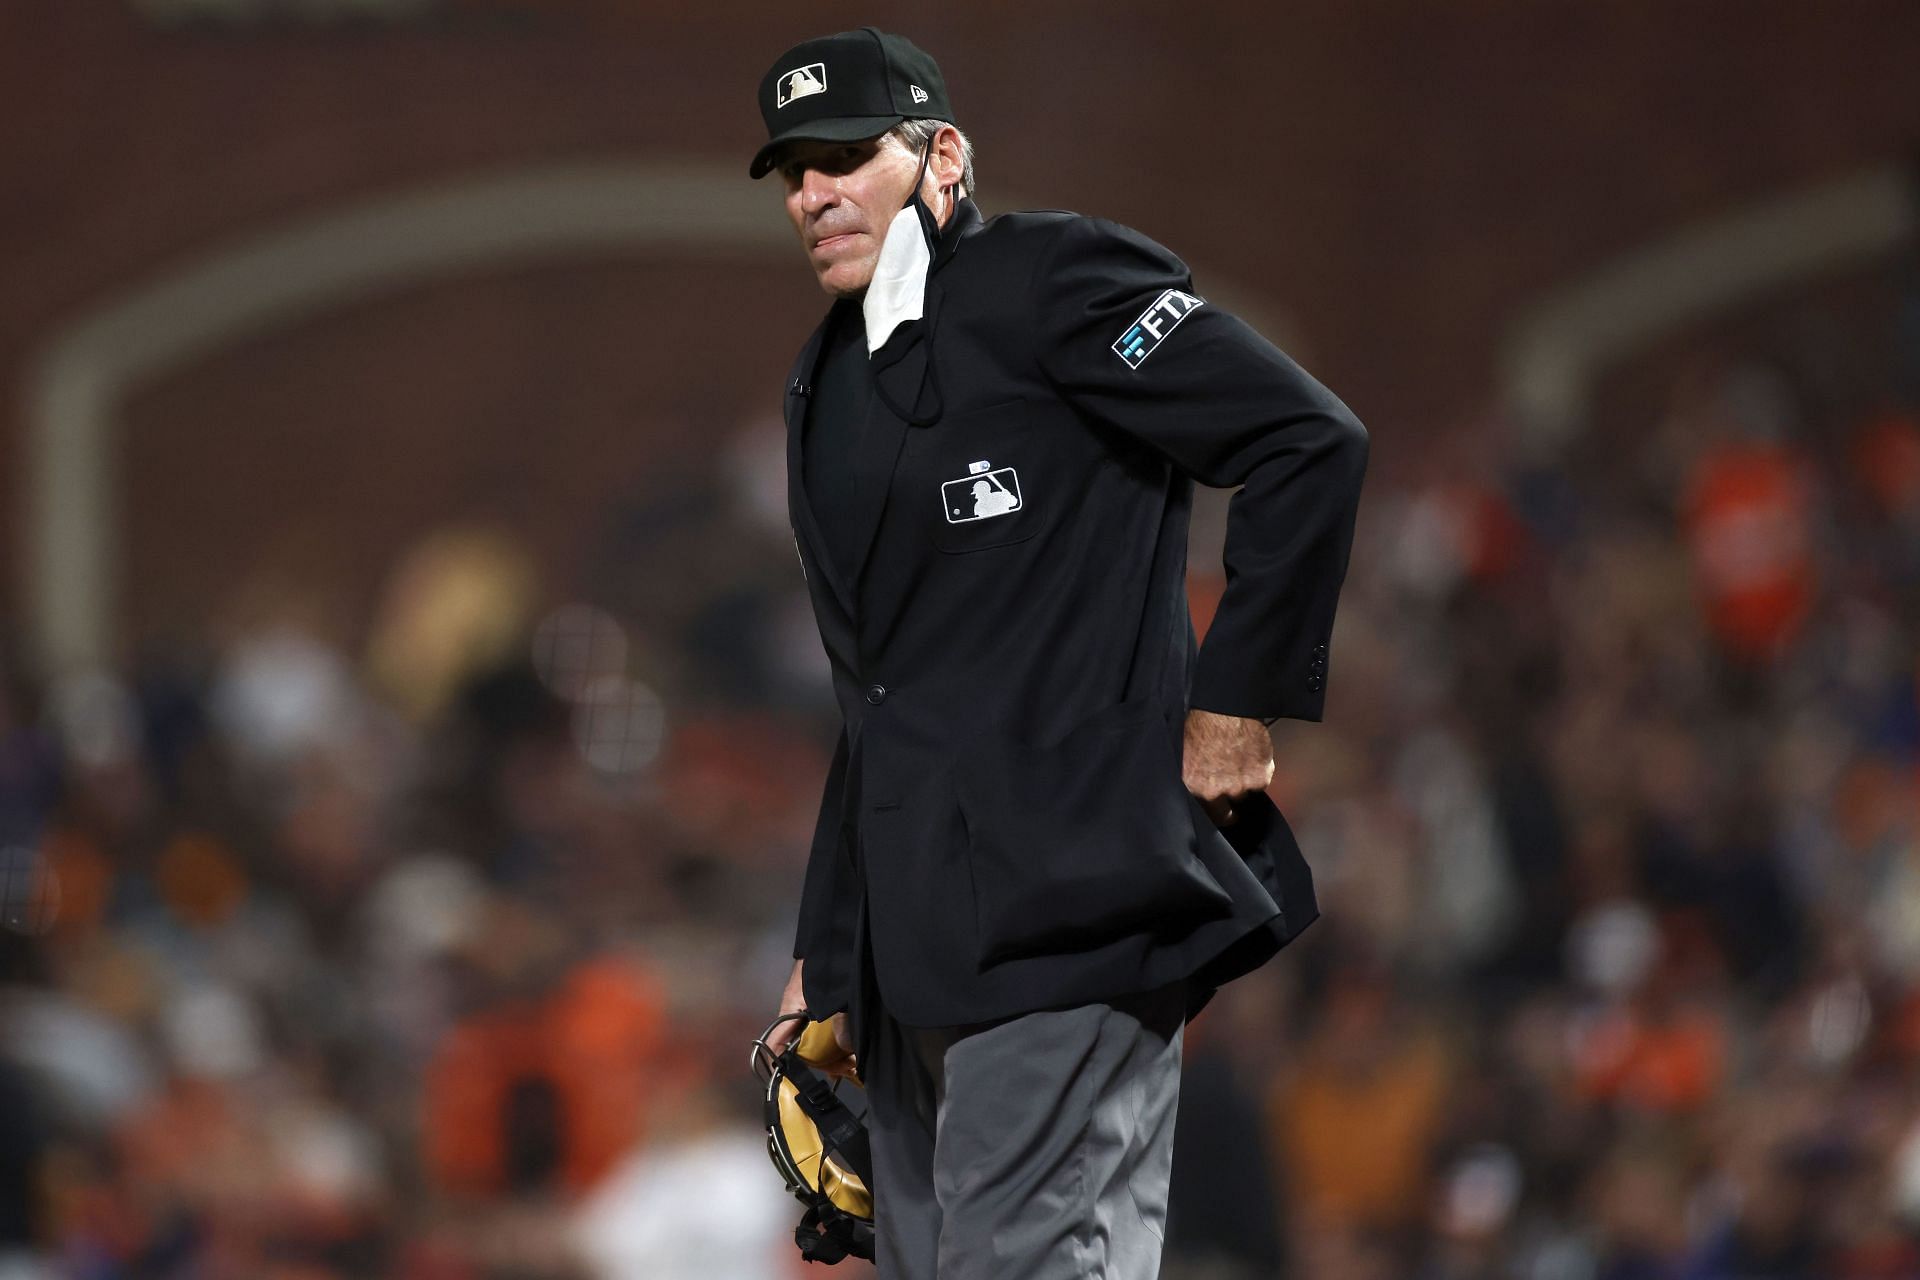 Padres – Giants: Umpire drops NSFW word on hot mic, becomes meme